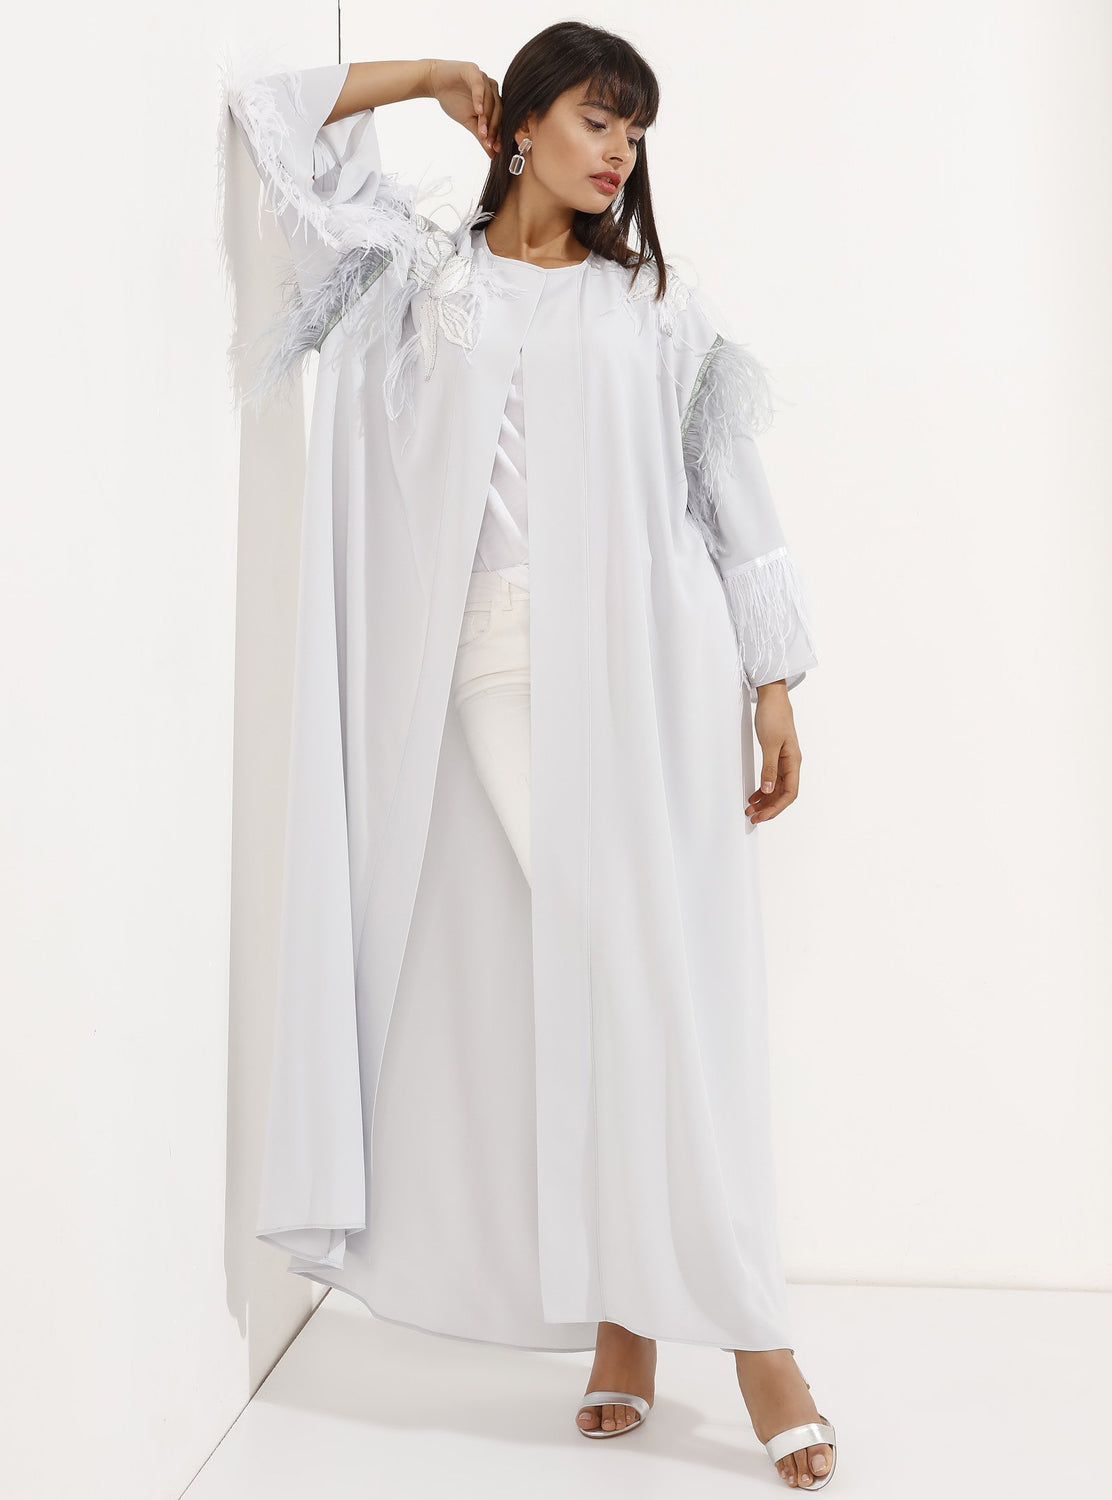 STORE WF Loose Cut Feathered Silver Kaftan Abaya Modest Open Abaya With Long Sleeves and Floral Embroidery in Silver